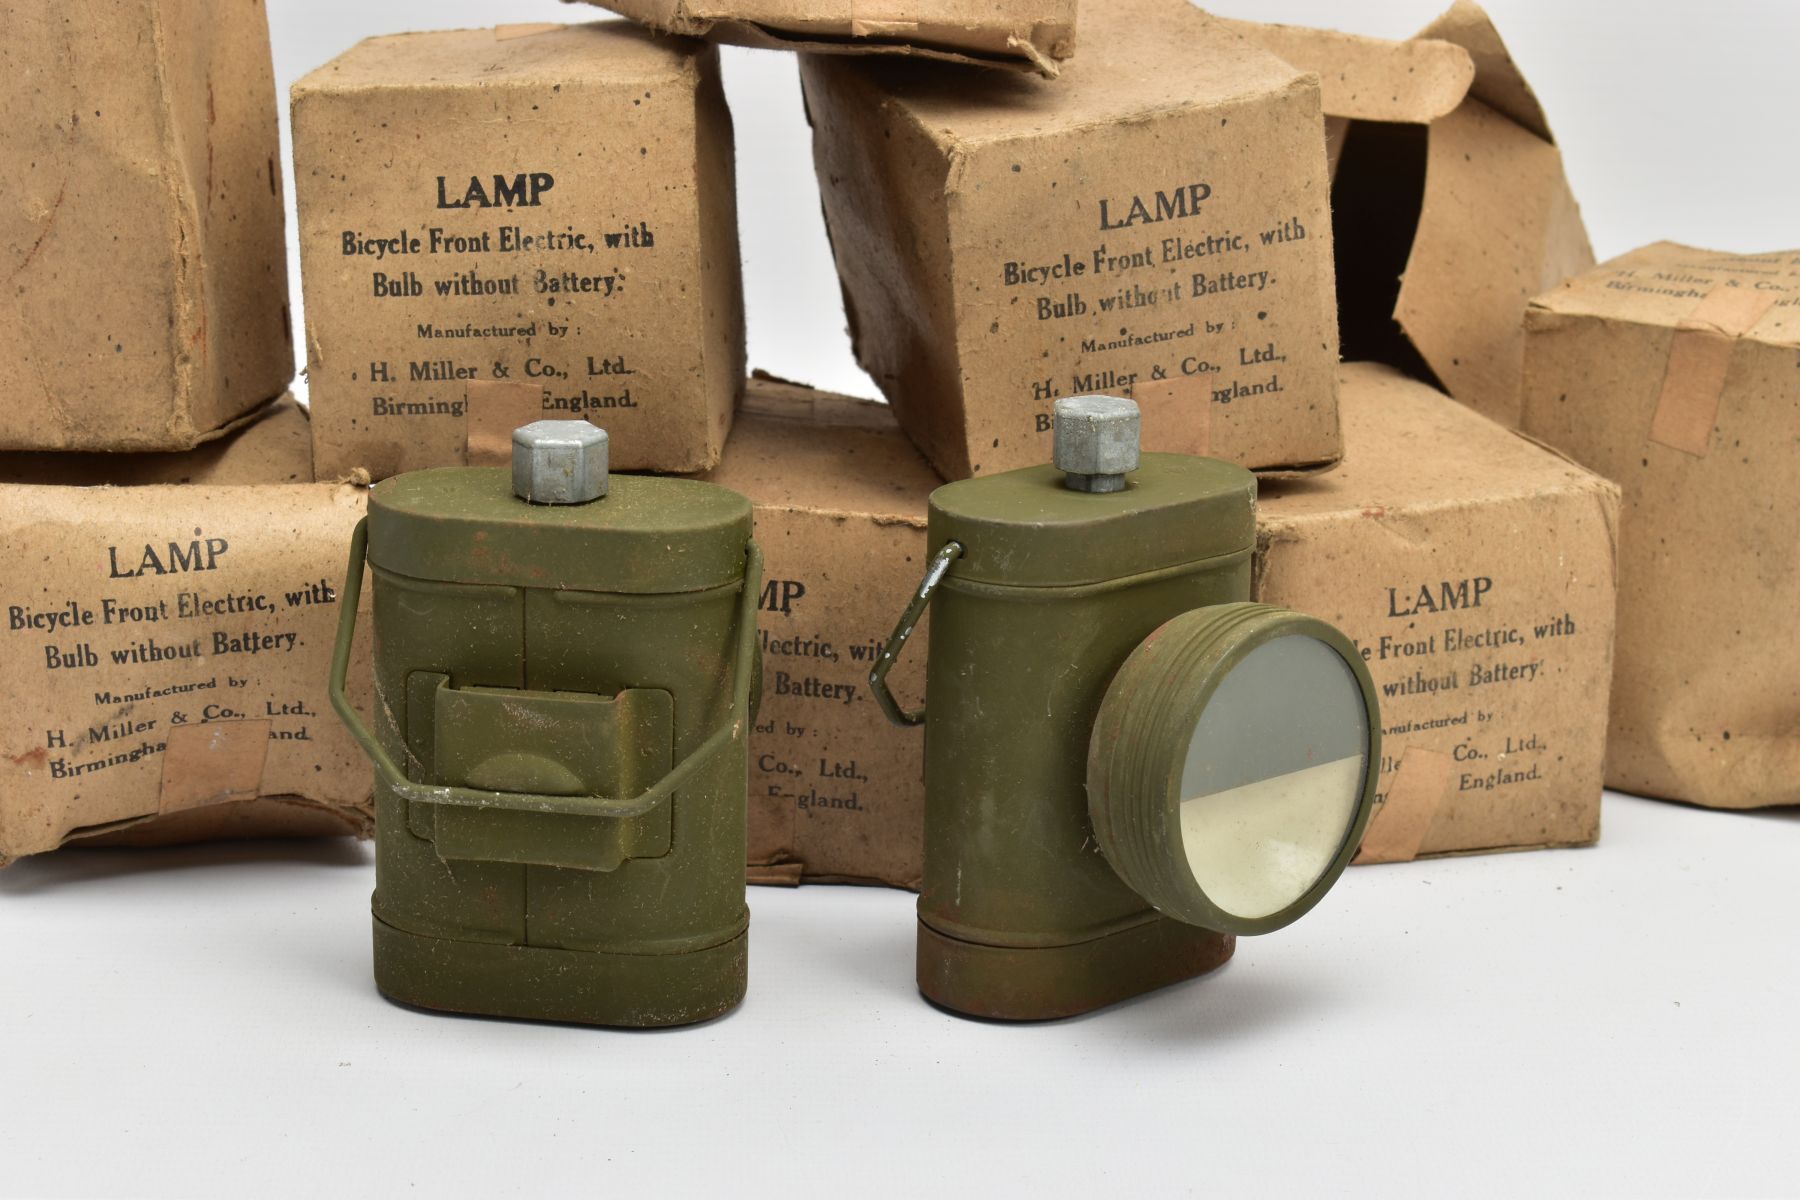 BOX CONTAINING TEN WORLD WAR TWO PERIOD Bicycle lamps boxed, new old stock, for use at night where - Image 2 of 3